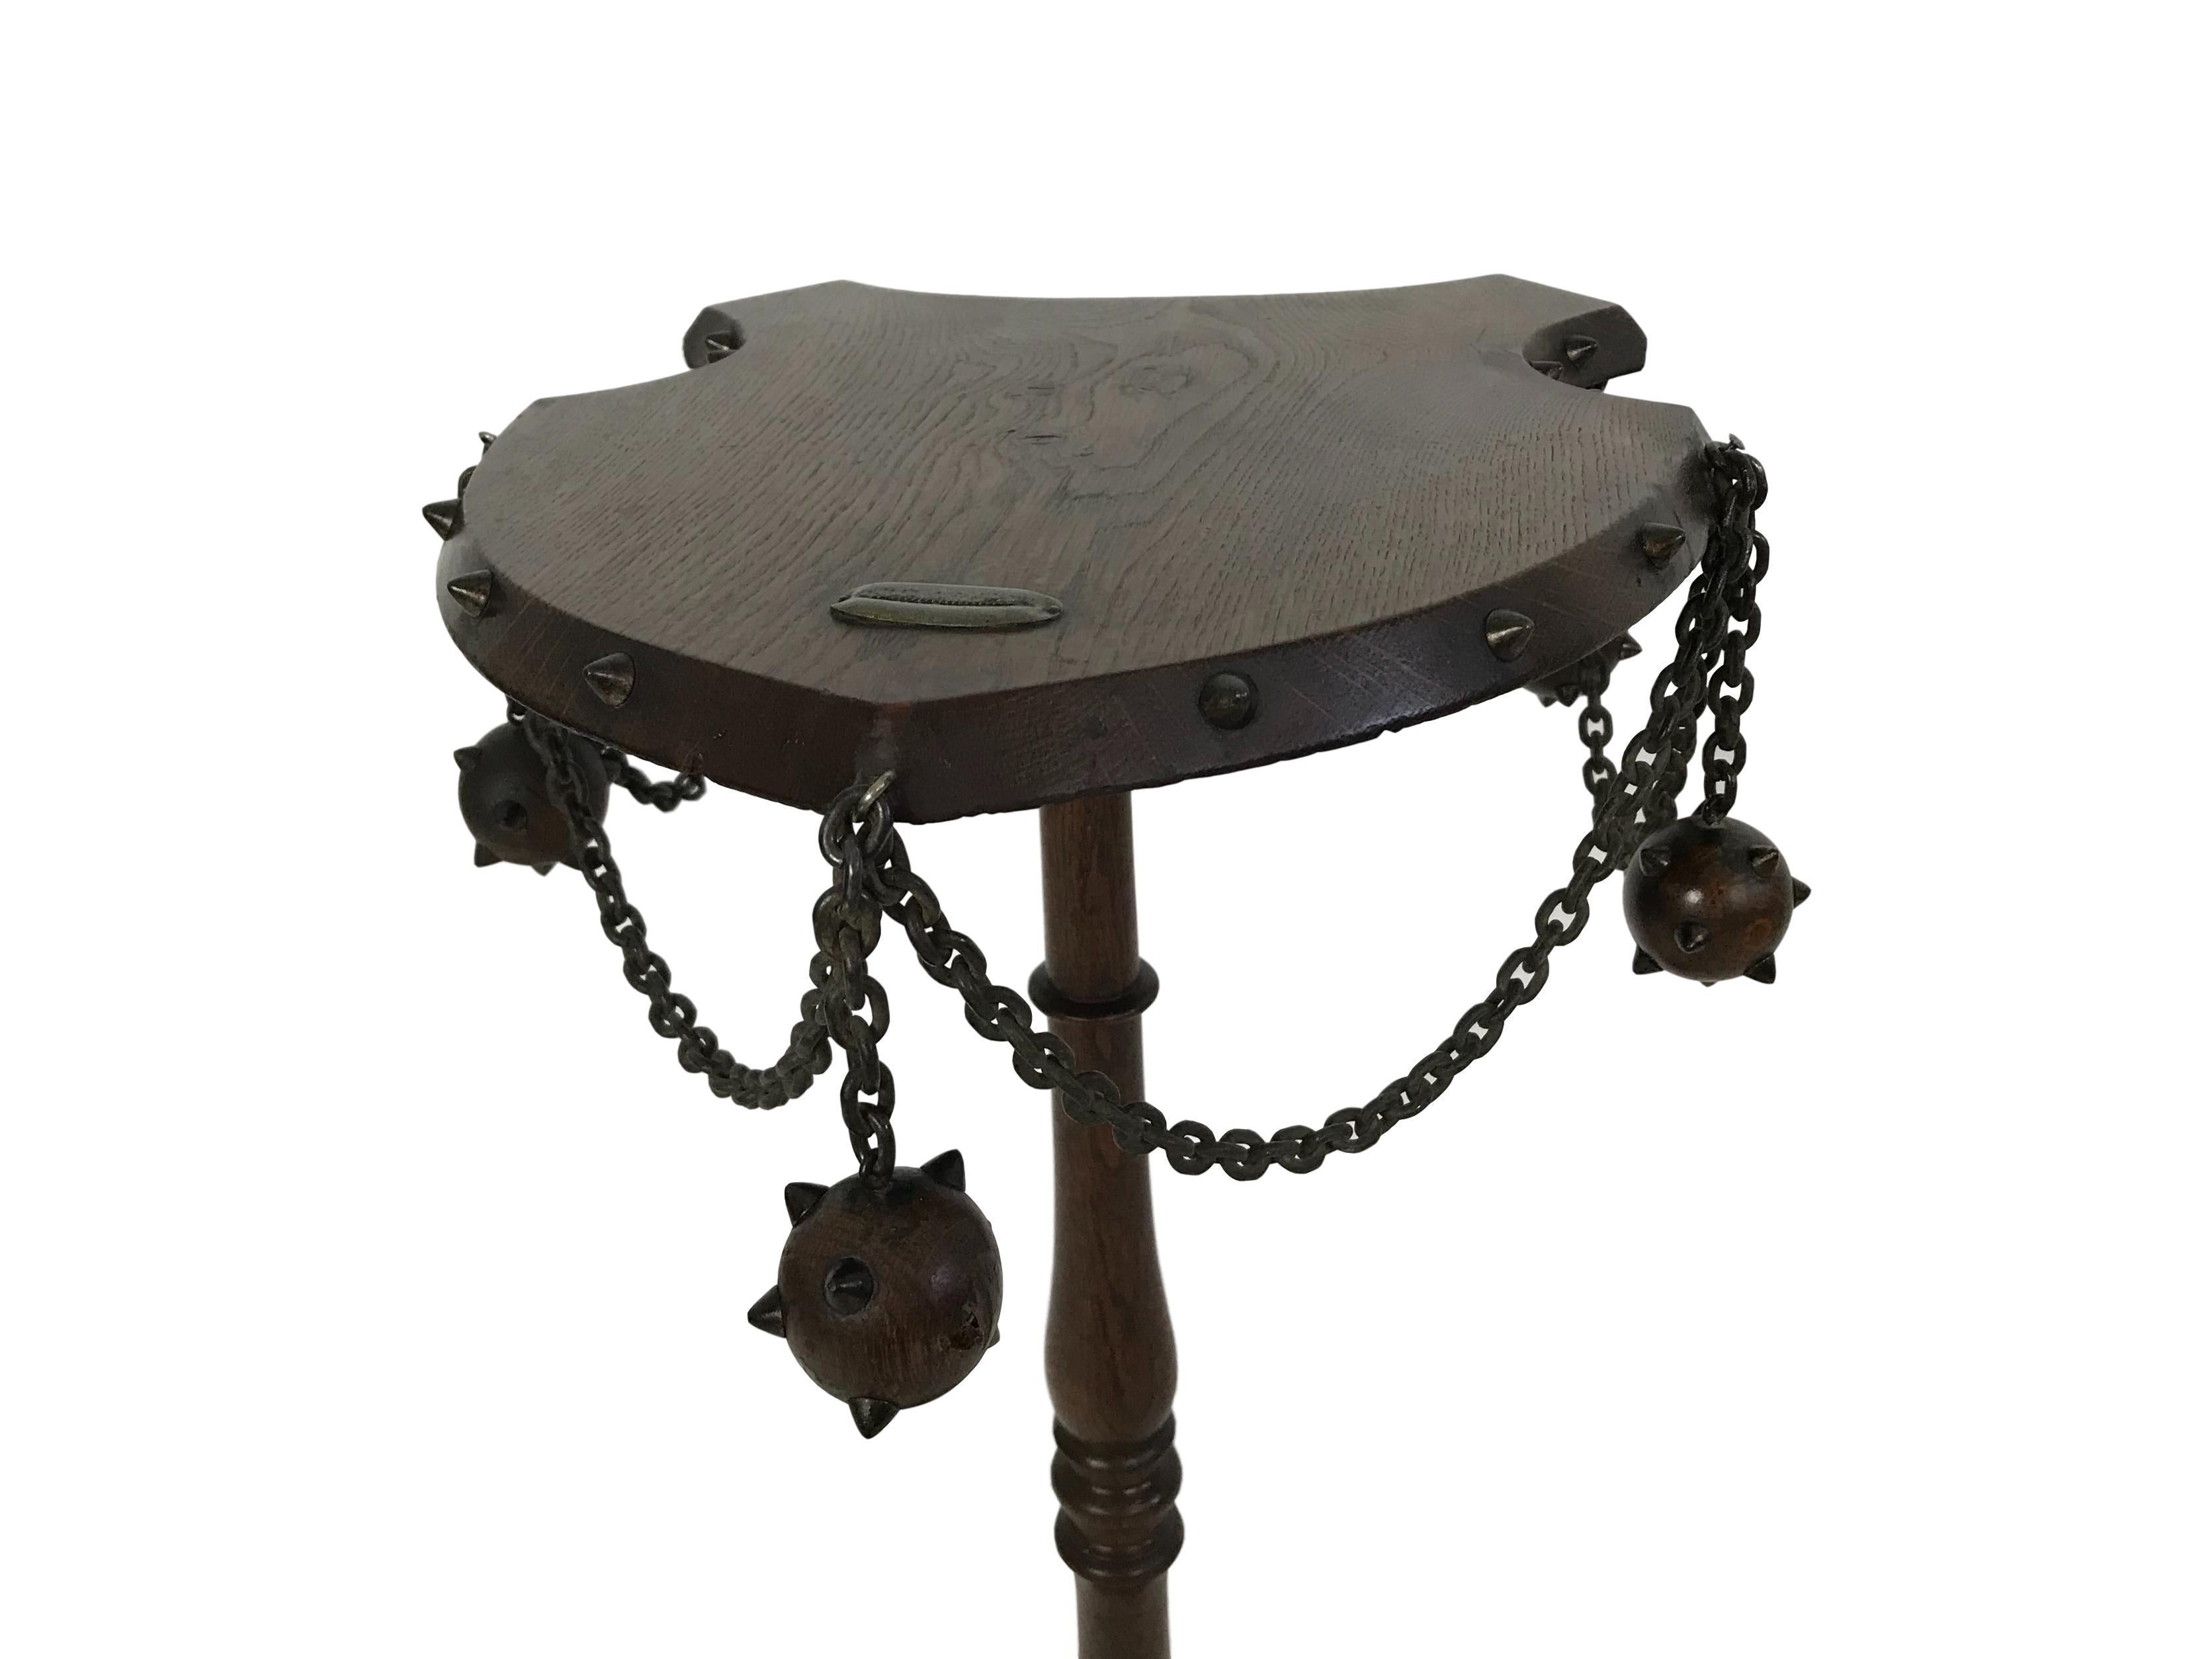 This is a one of a kind medieval themed smoking table. The top of the table is in the shape of a shield with a zinc match strike fixed to it. Along the sides hang wood mace balls with metal spikes and chain. Metal spikes adorn the edges of the